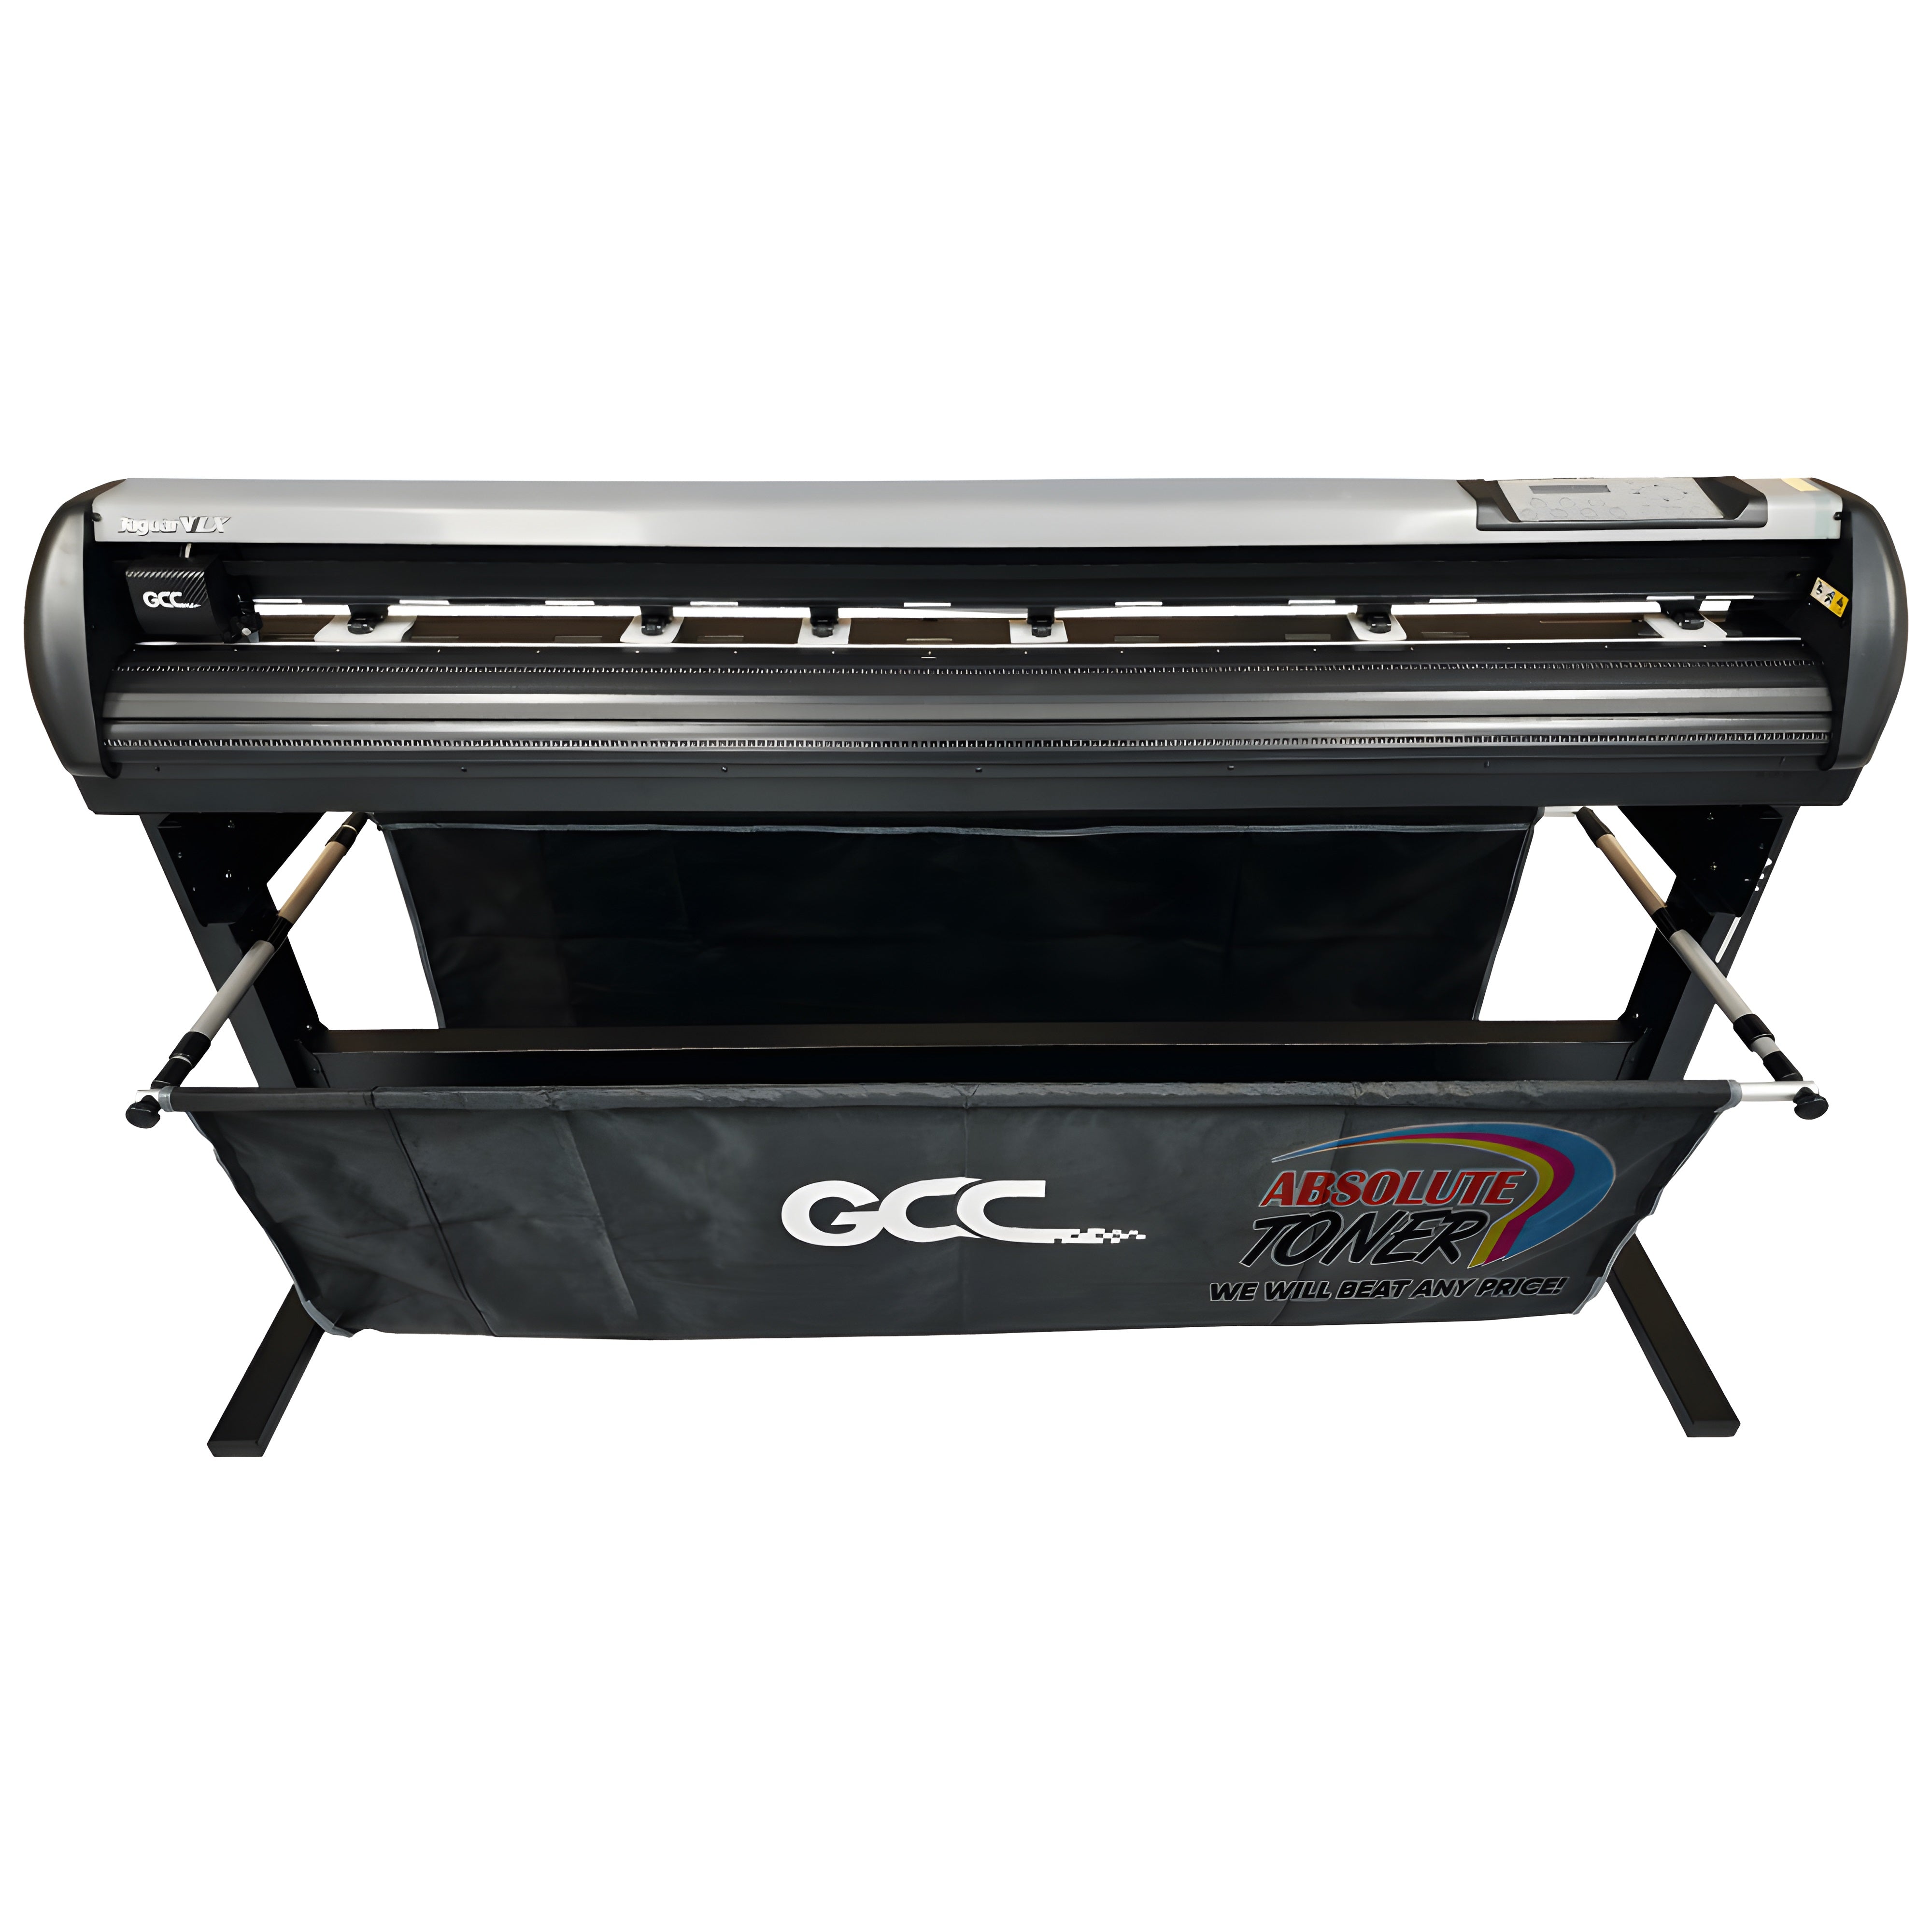 Absolute Toner $119/Month New GCC J5-183LX 72" Inch (183cm) Jaguar V Vinyl Cutter With Enhanced AAS II Contour Cutting System Including Stand And Media Basket Vinyl Cutters